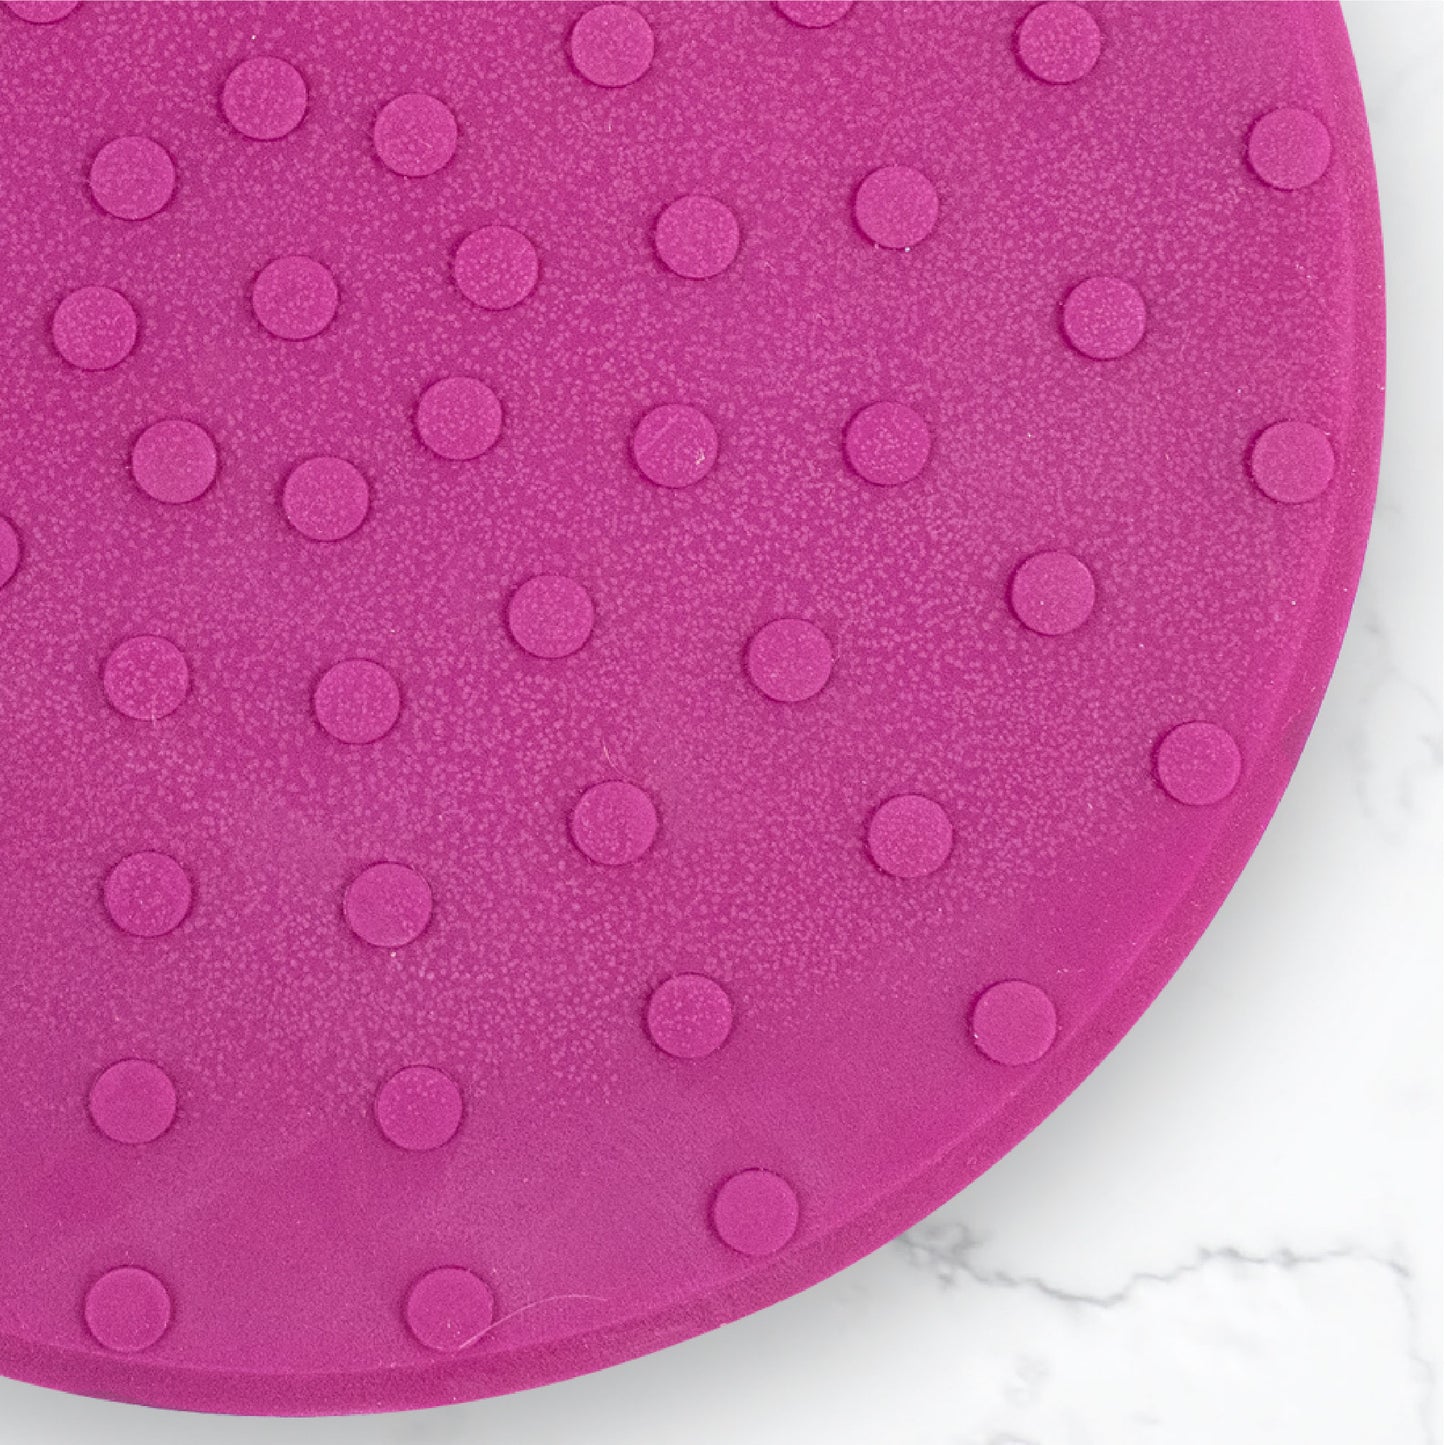 Yoga Support Jelly Pad - Plum